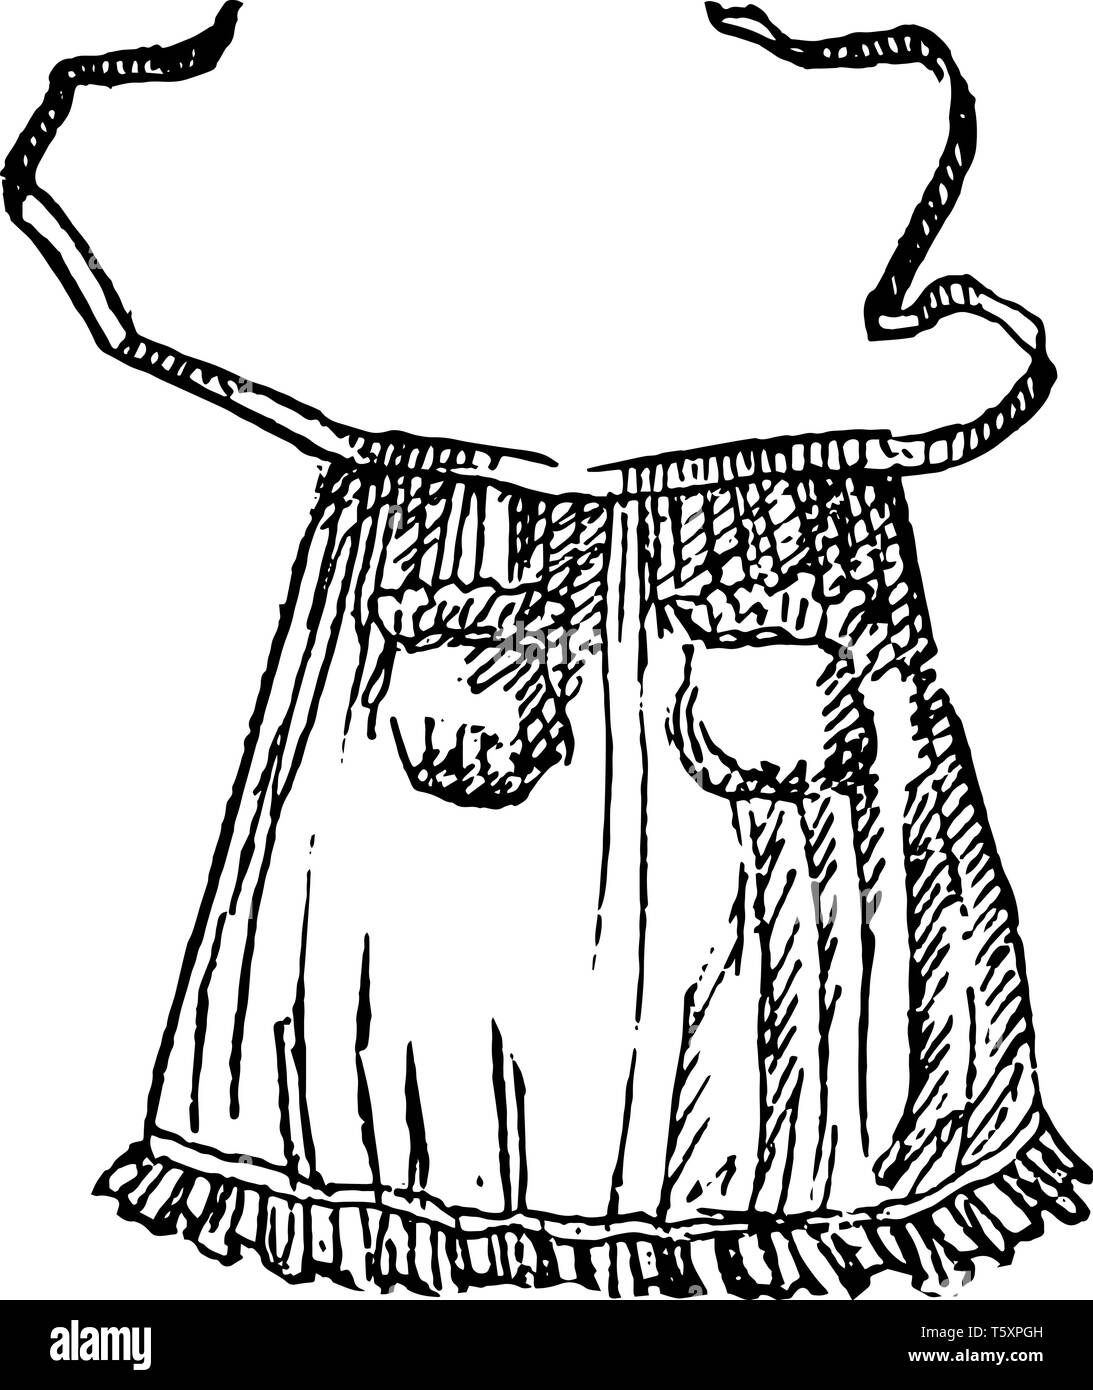 Apron are worn on the fore part of the body vintage line drawing or ...